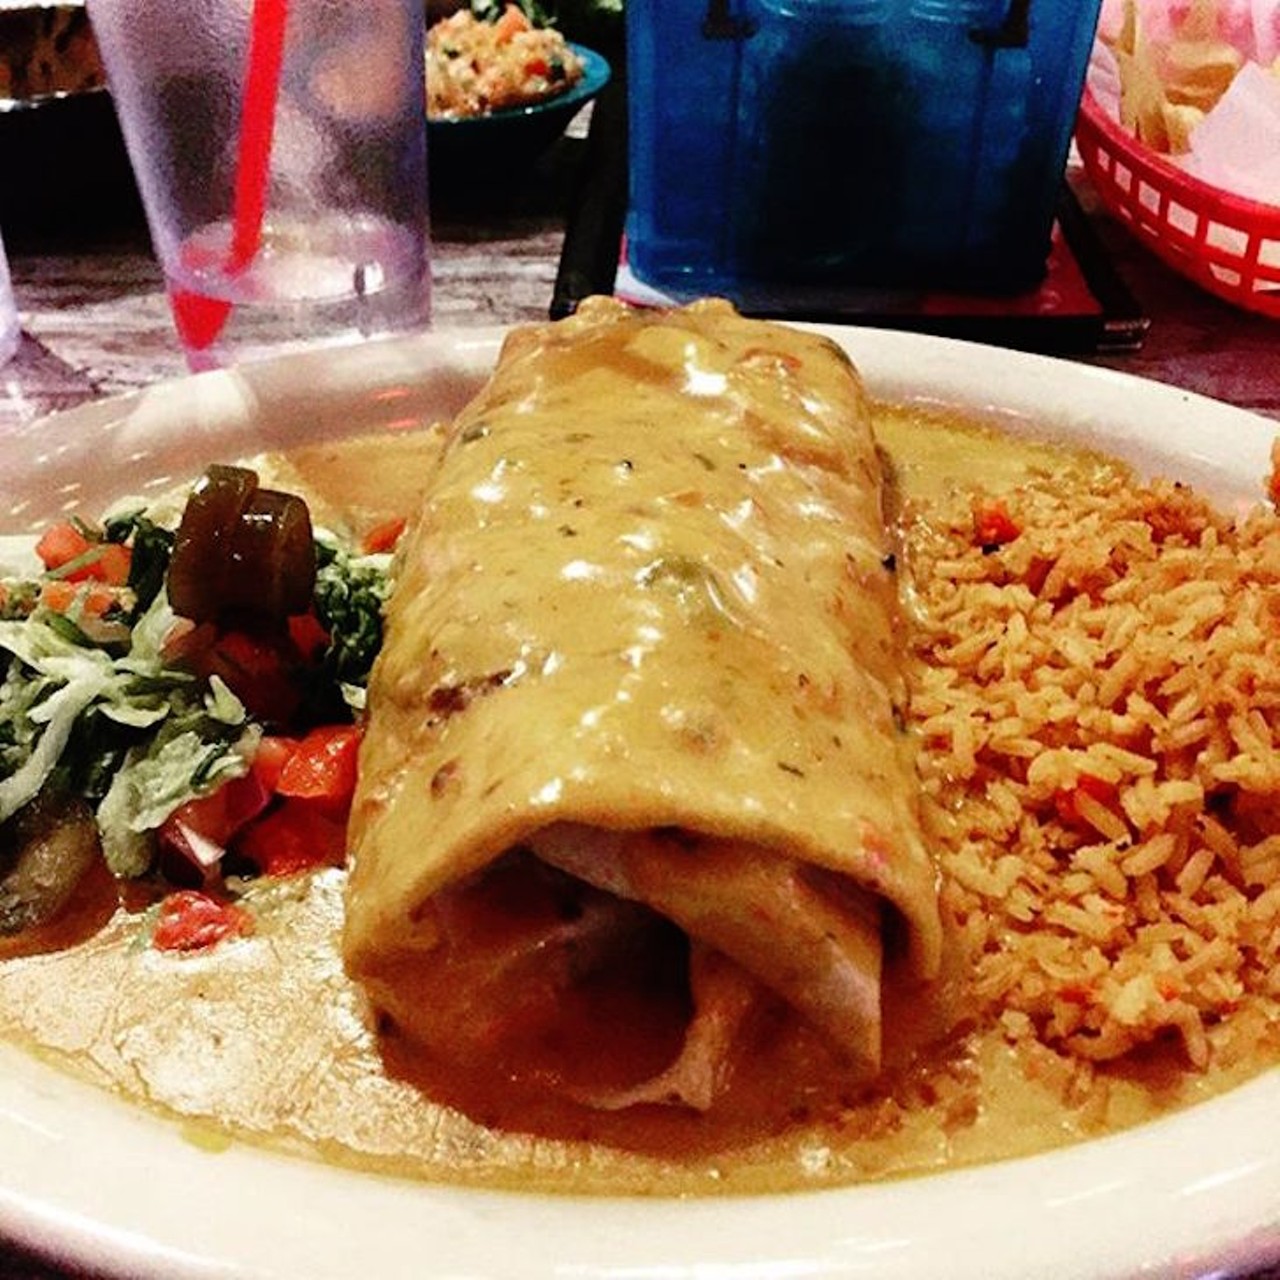 Chuy&#146;s
1434 N. Alafaya Trail
If you&#146;re a burrito fan, you should probably try Chuy&#146;s &#147;Big As Yo&#146; Face&#148; Burrito, which is just what it sounds like. This homemade, 12&#148; flour tortilla is stuffed with refried beans, cheese and your choice of bean and cheese, seasoned ground sirloin, oven roasted chicken, or fajita chicken or beef. Depending on what you order, the price ranges from $8.79 to $10.99, but each meal is served with a choice of sauce and Mexican or green chile rice.
Photo via sweetdee013/Instagram